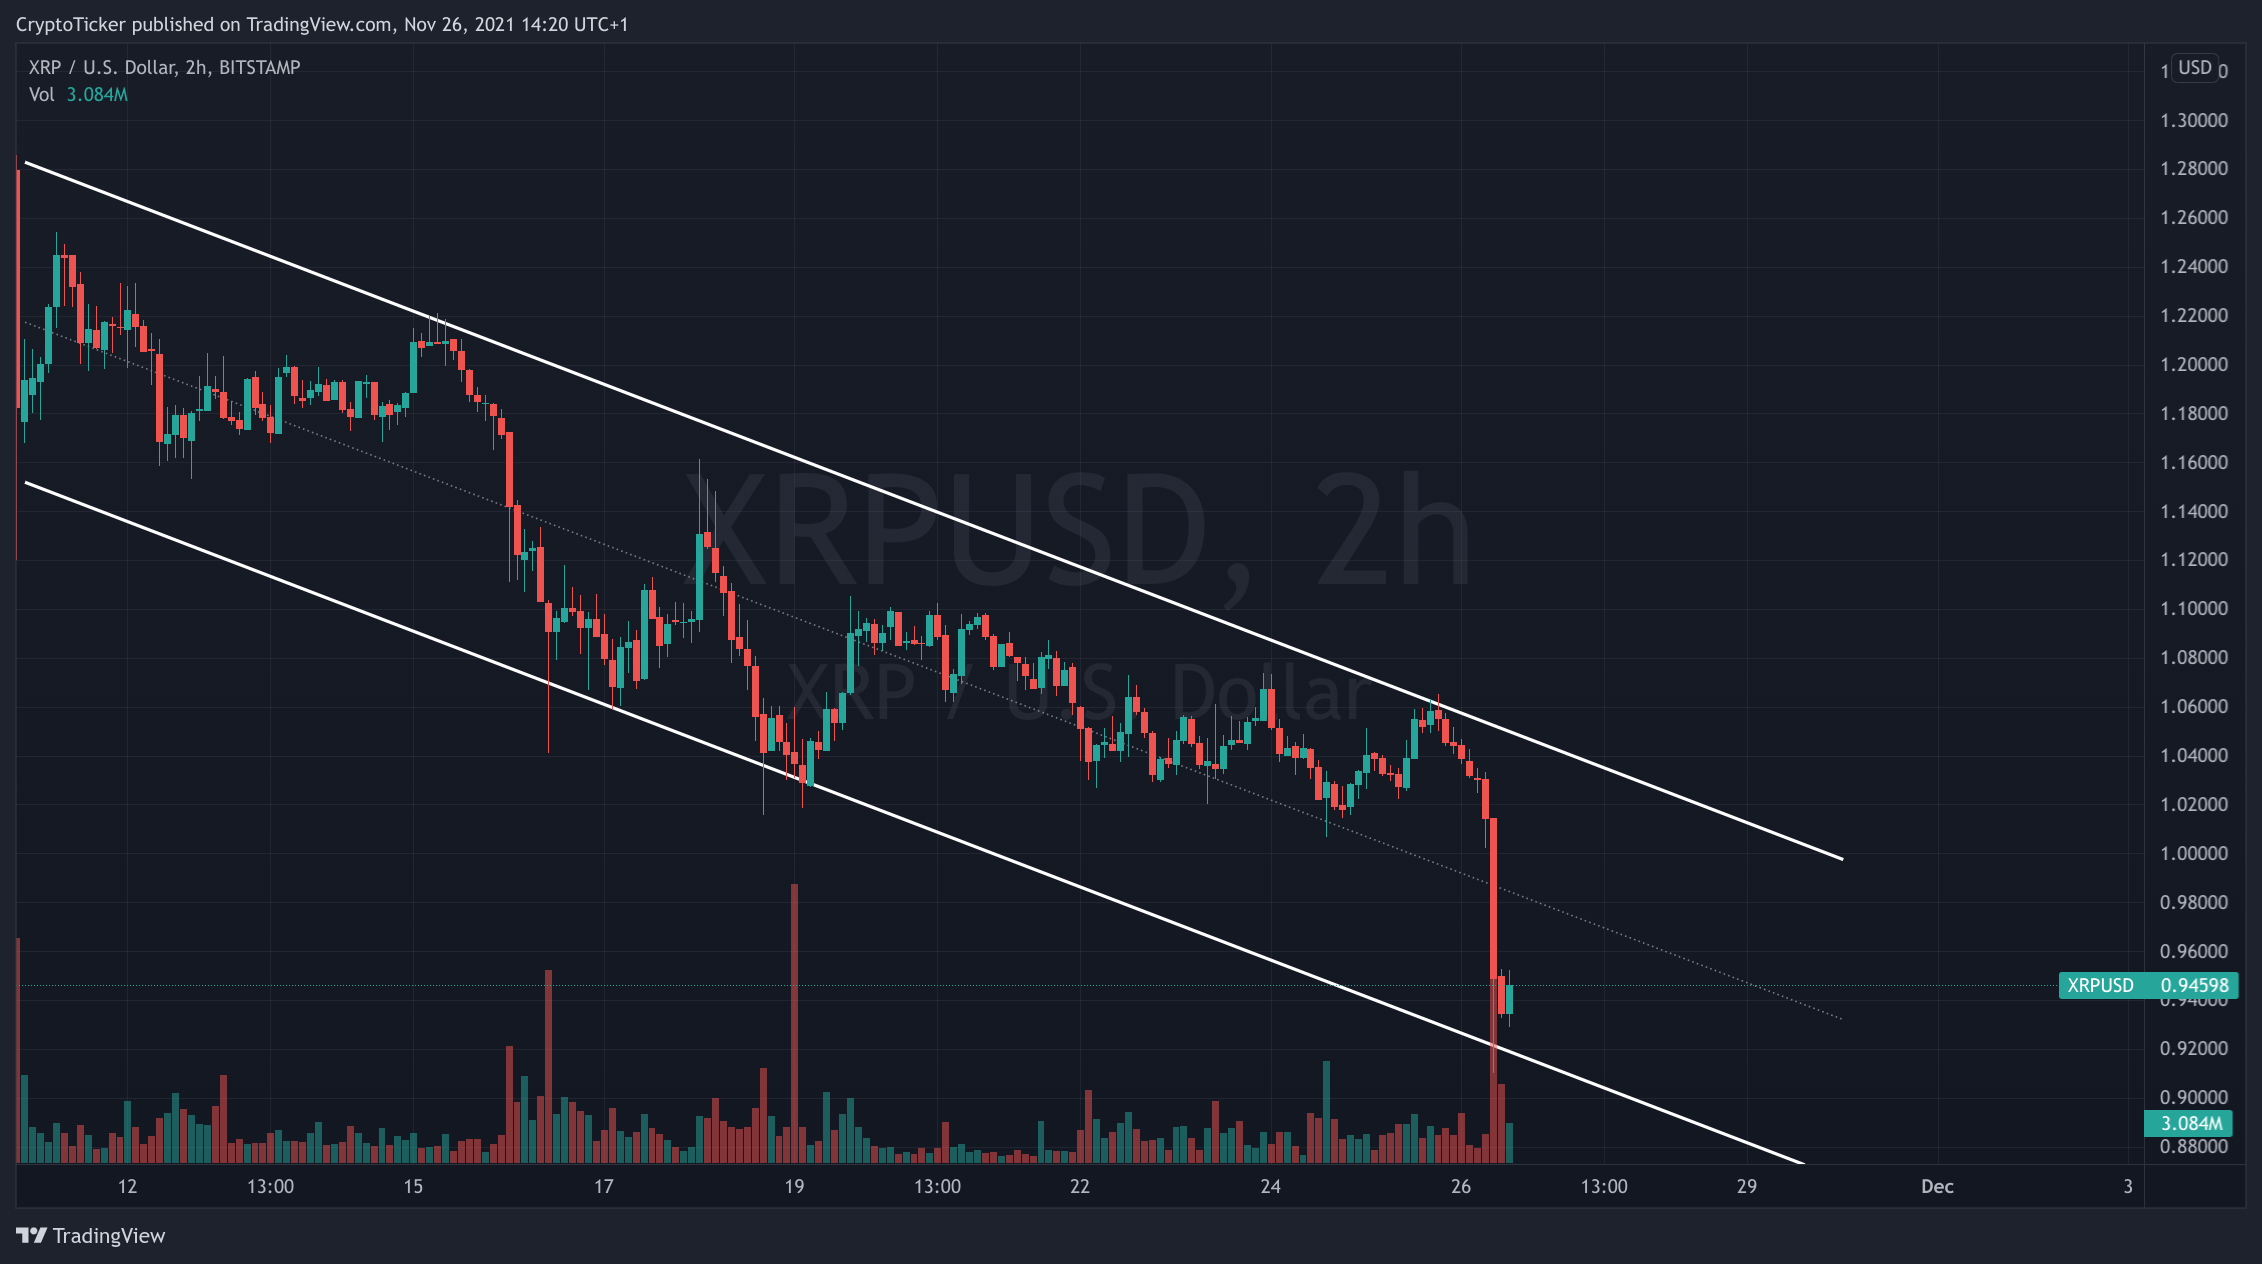 XRP/USD 2-hours chart showing XRP's downtrend